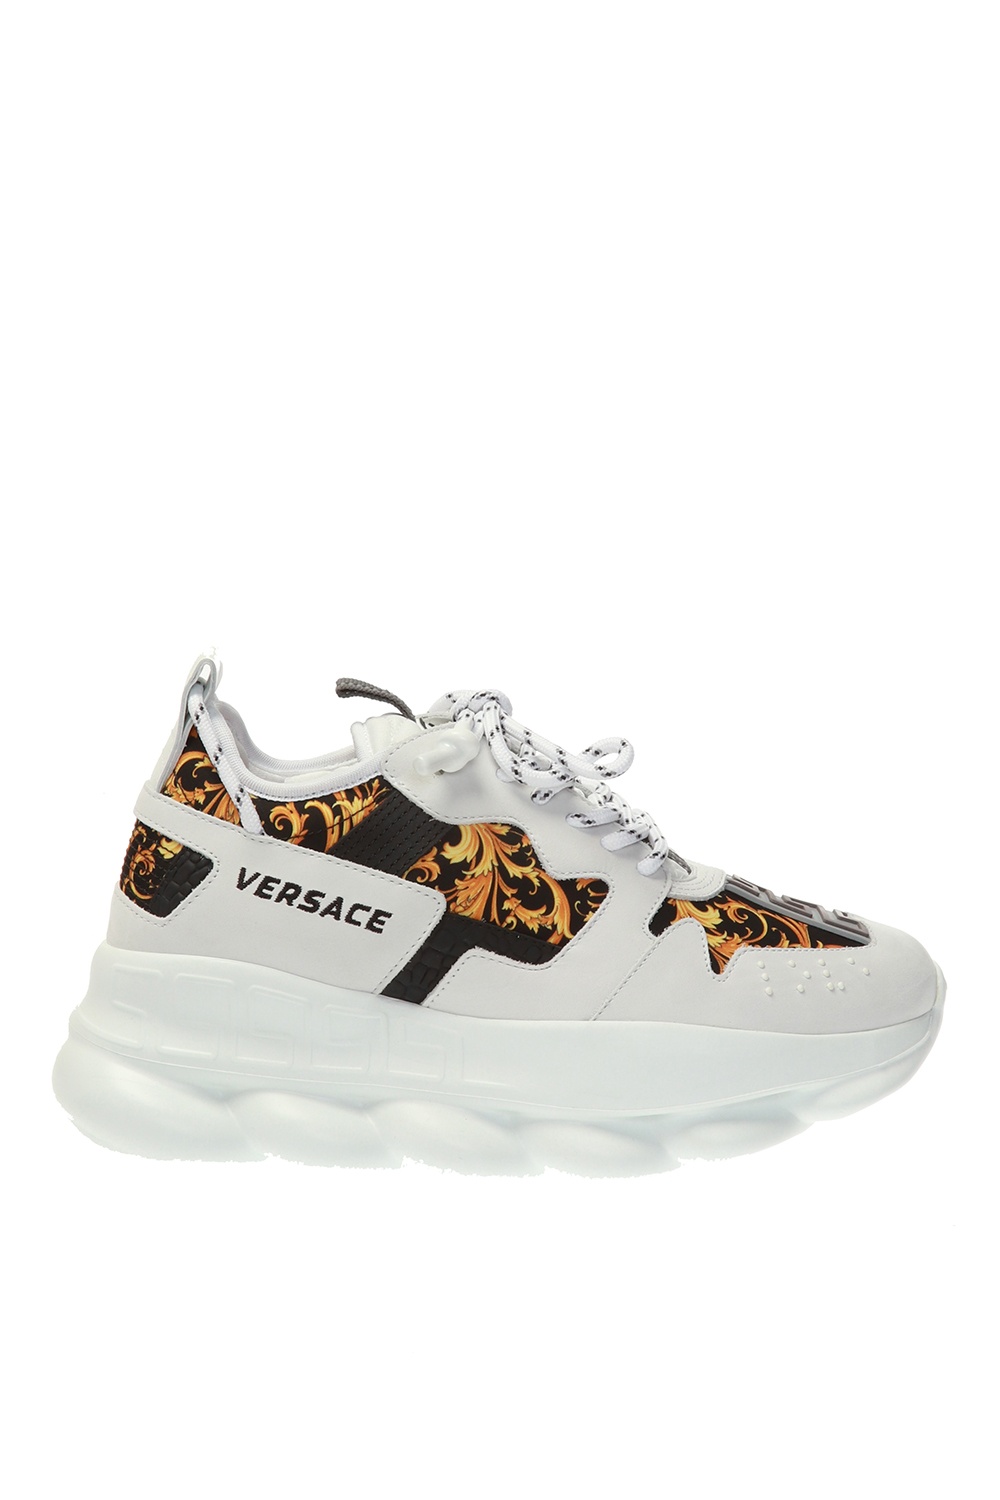 versace chain reaction size guide